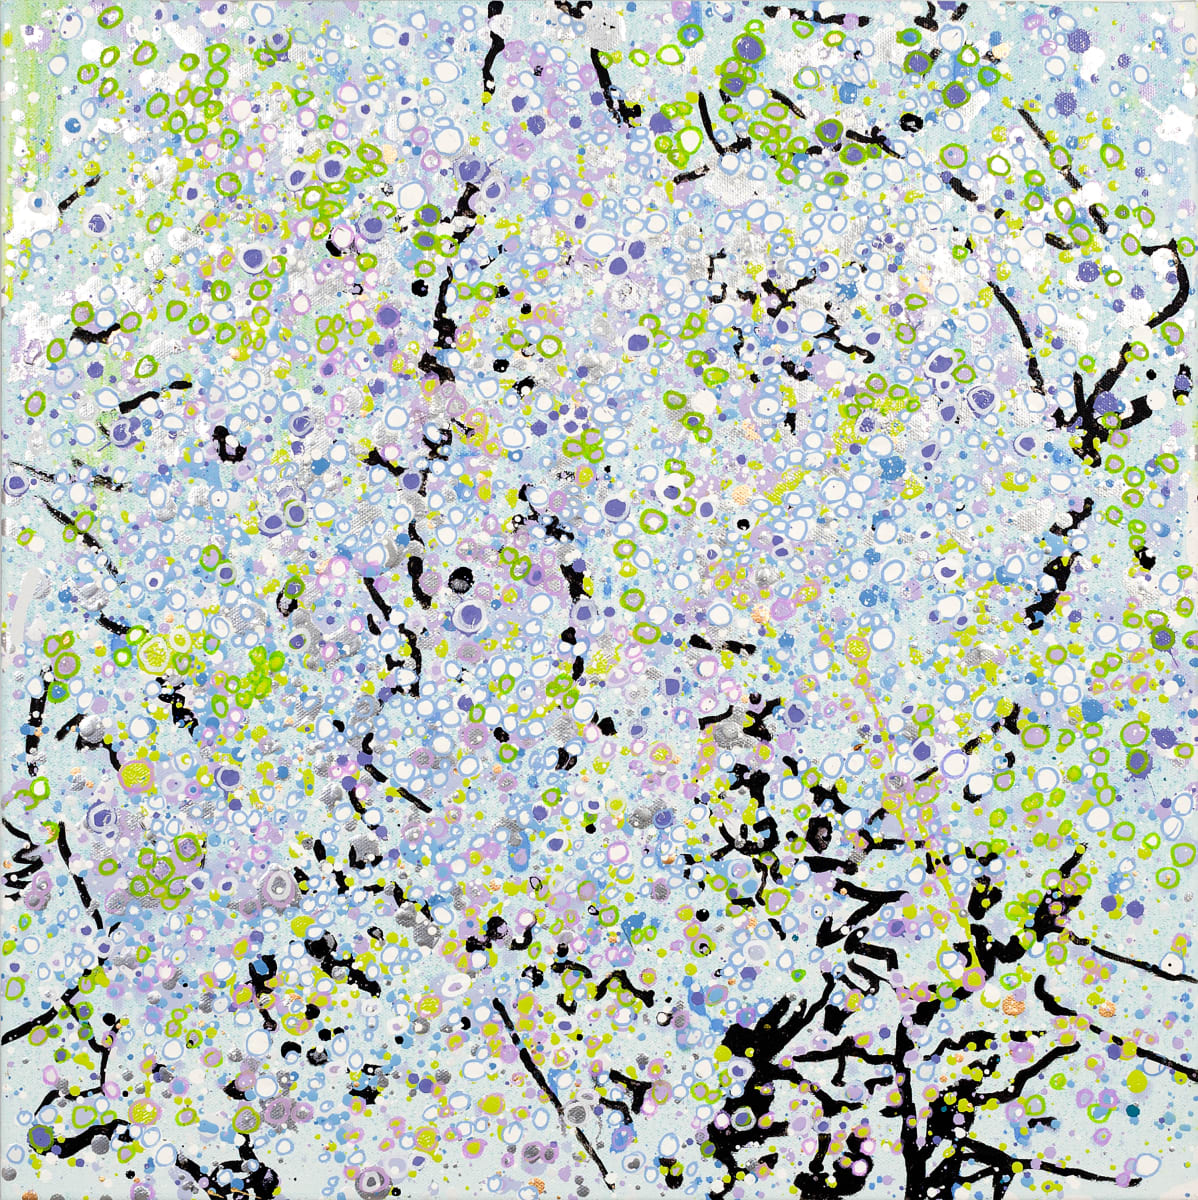 Almond Tree - Opio by Leslie Parke  Image: "Almond Tree - Opio", 18 inches x 18 inches, oil, metallic paint, and acrylic markers on canvas, © 2022 Leslie Parke